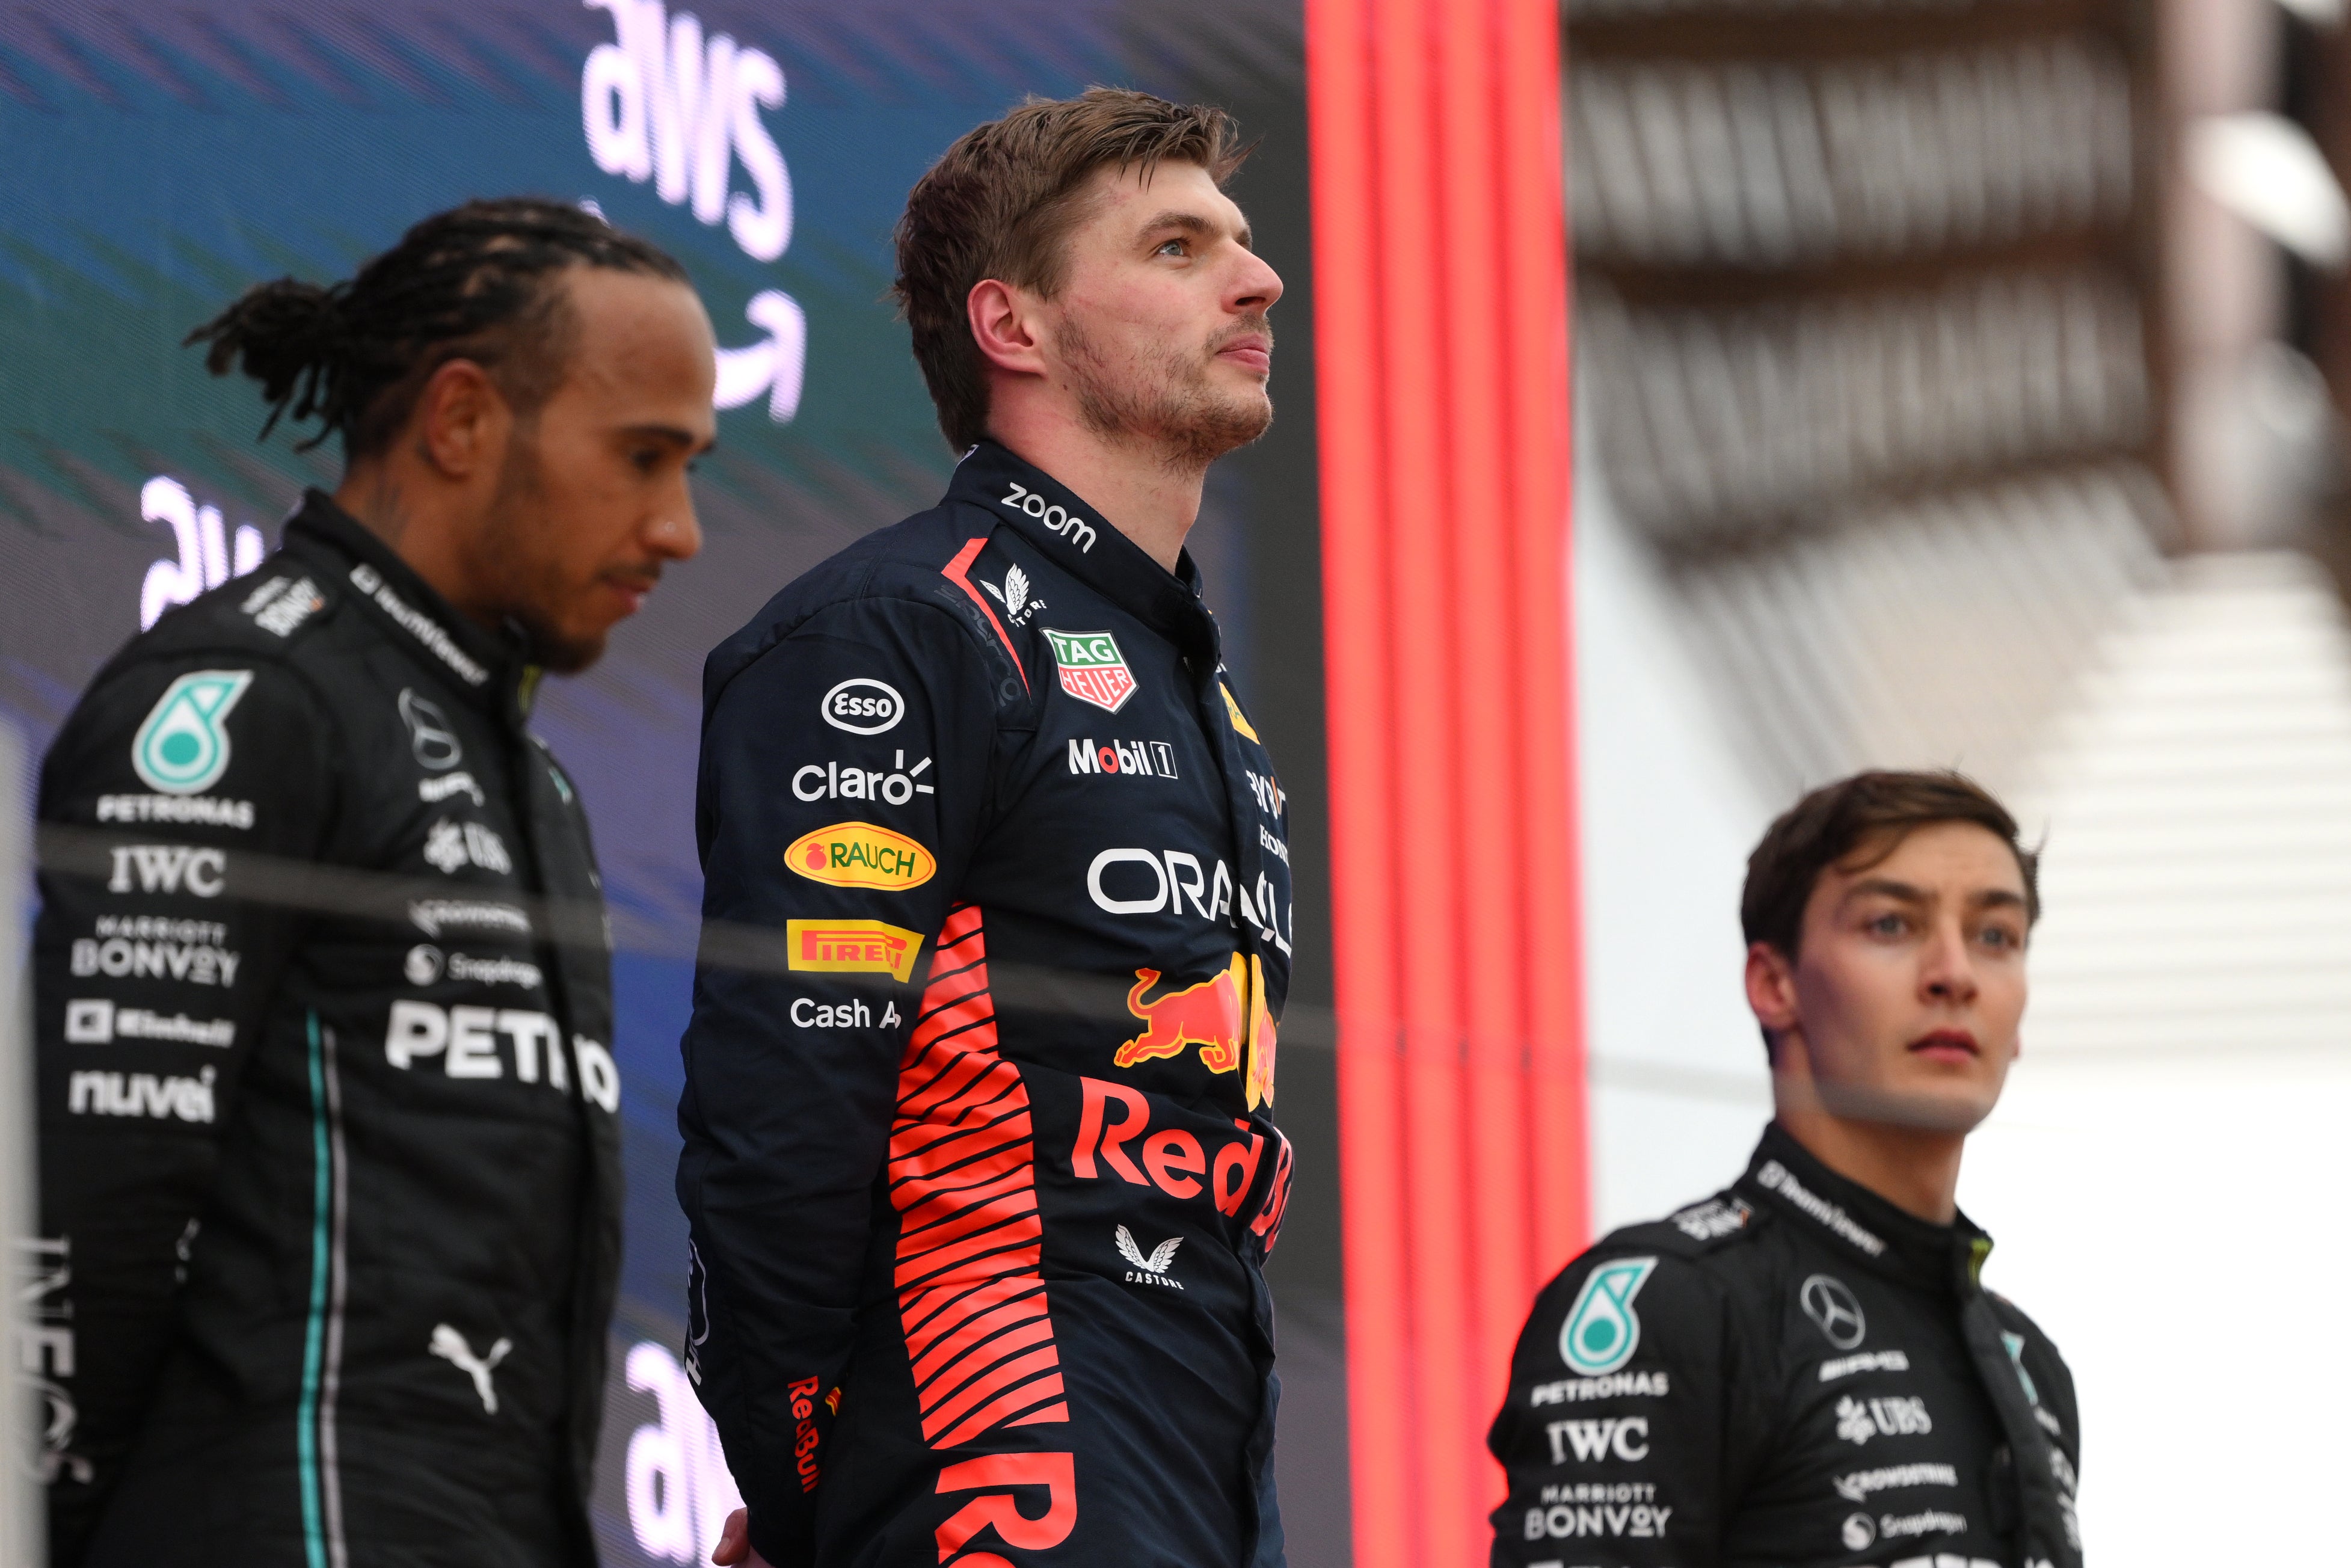 Max Verstappen was in a league of his own once again in Spain on Sunday